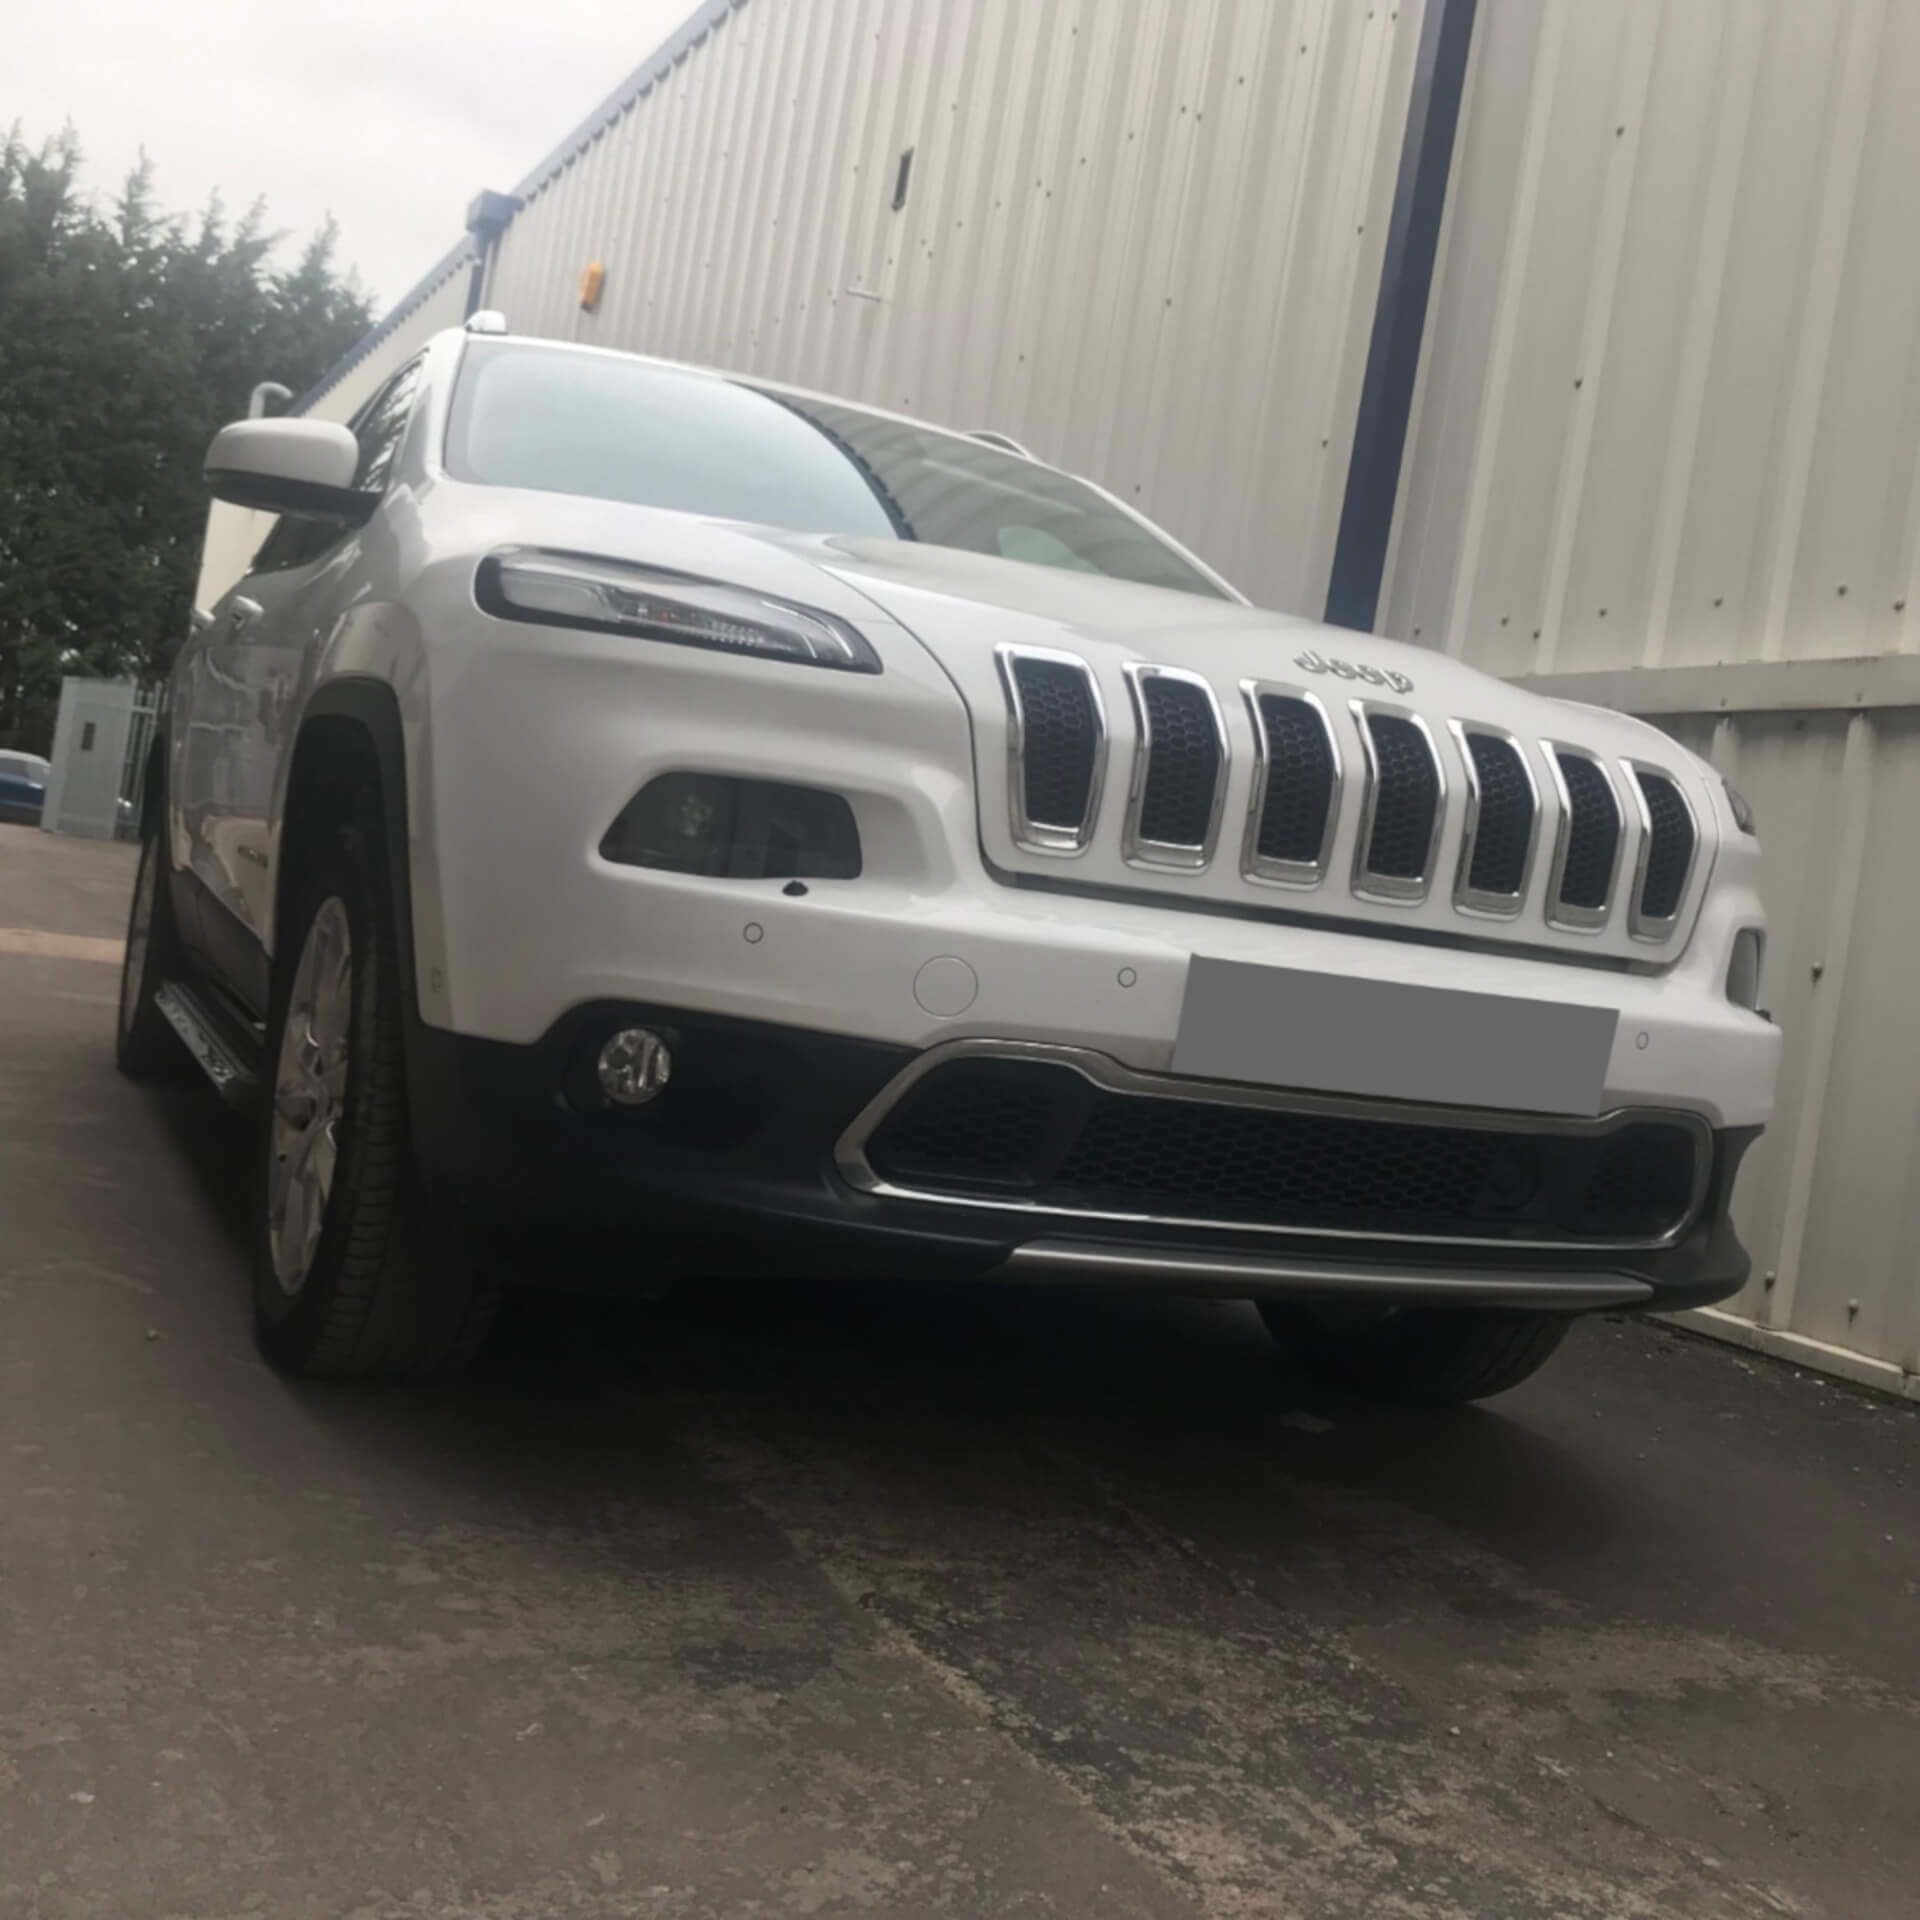 Direct4x4 accessories for Jeep Cherokee vehicles with a photo of a the front of a white Jeep Cherokee parked outside our offices